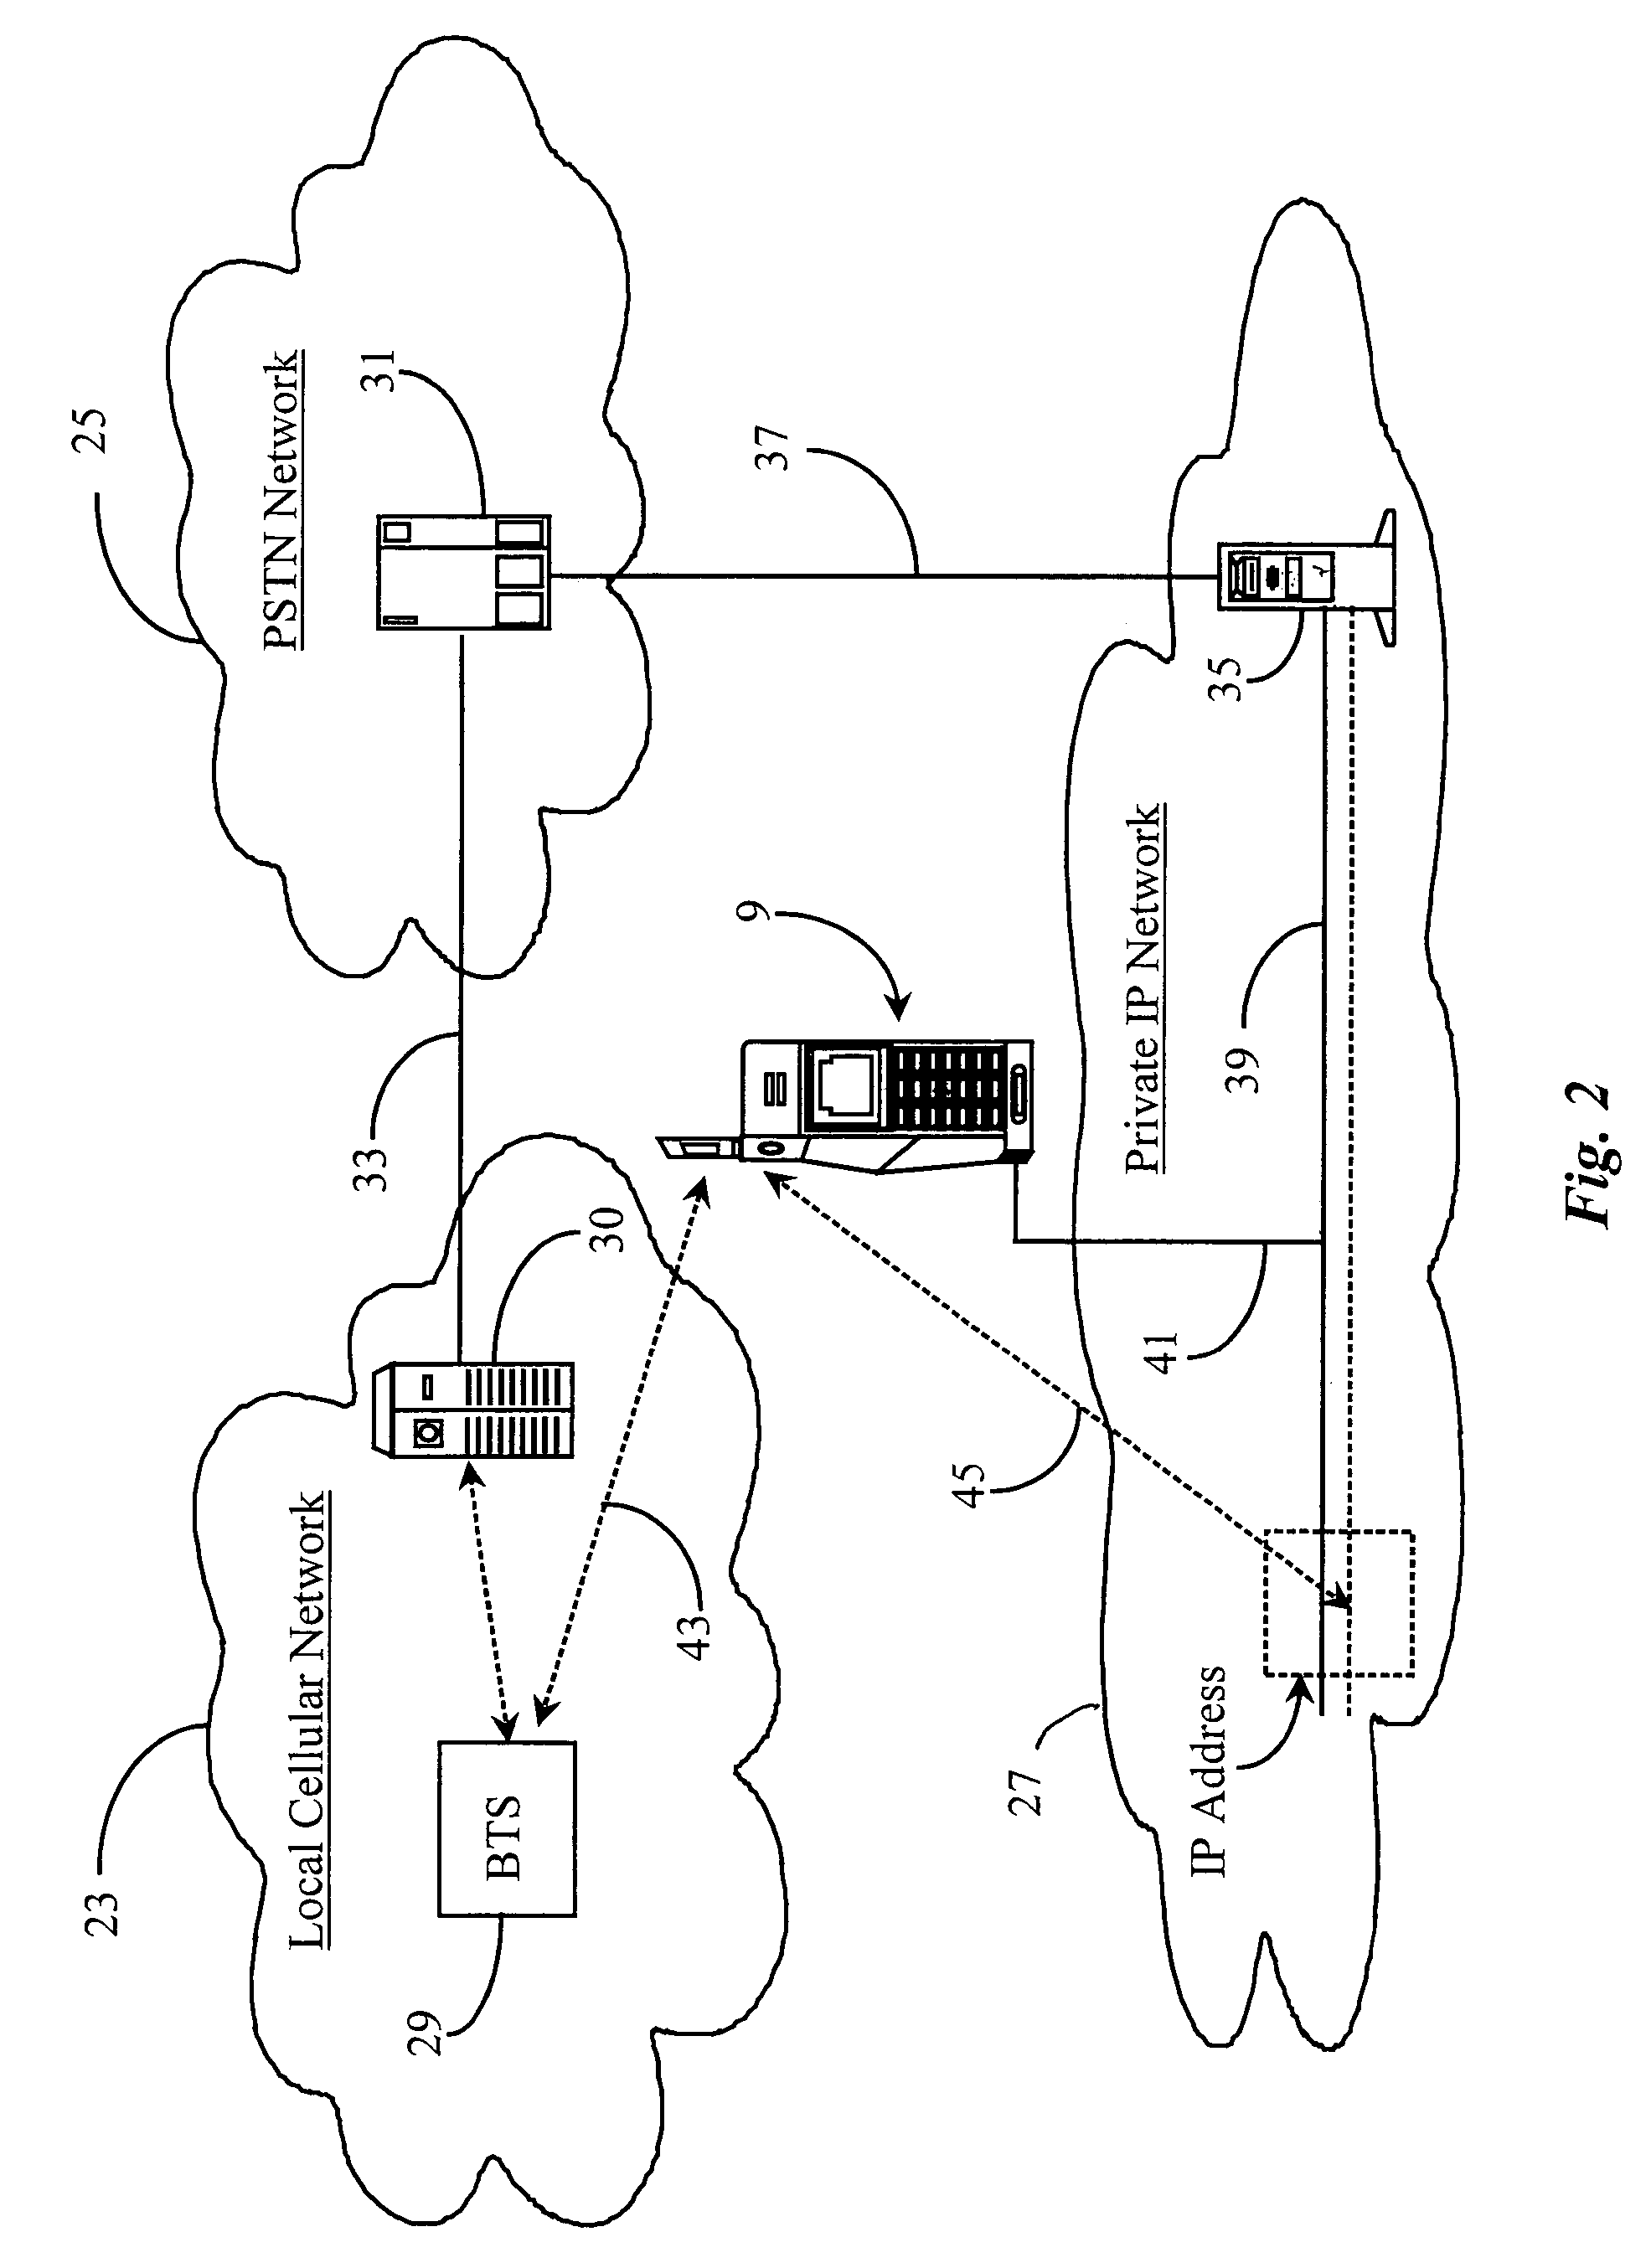 Telecommunication system for automatically locating by network connection and selectively delivering calls to mobile client devices